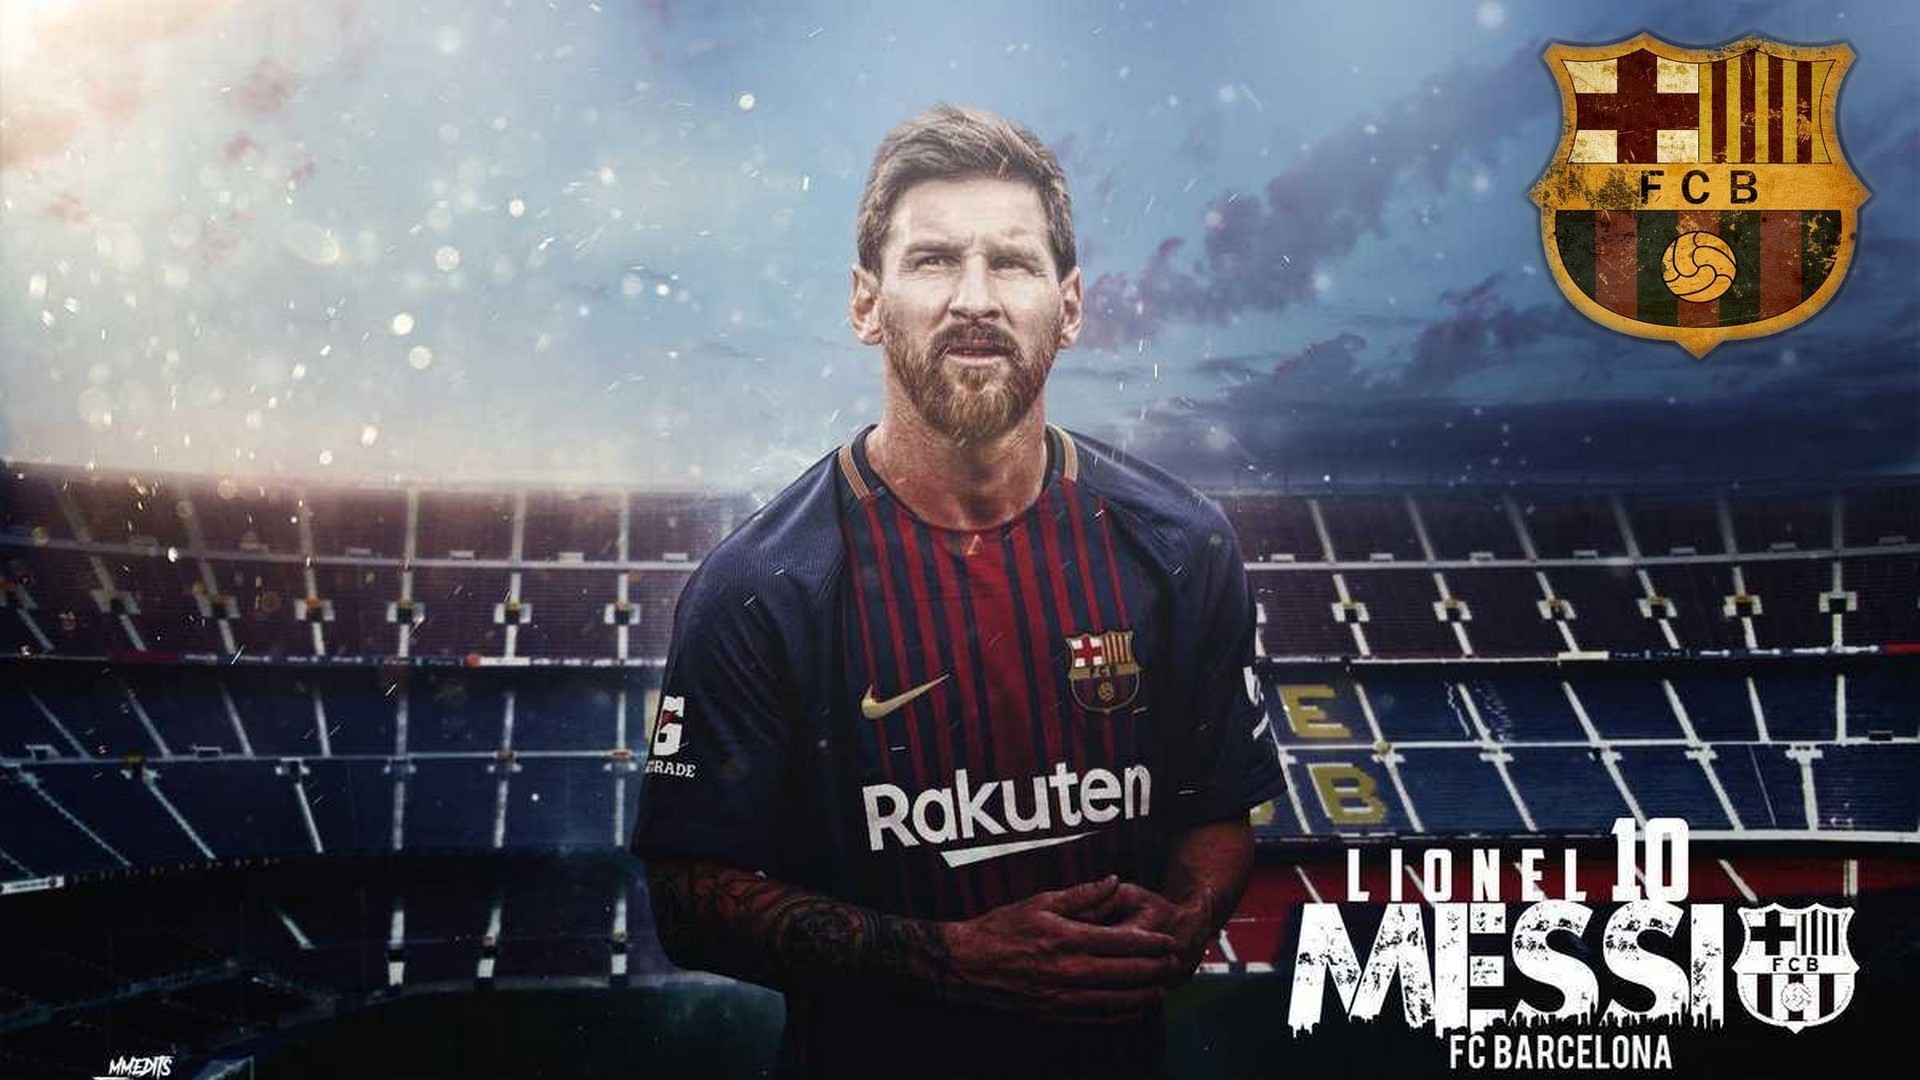 1920x1080 Lionel Messi Wallpaper with resolution  pixel. You can make this  wallpaper for your Mac